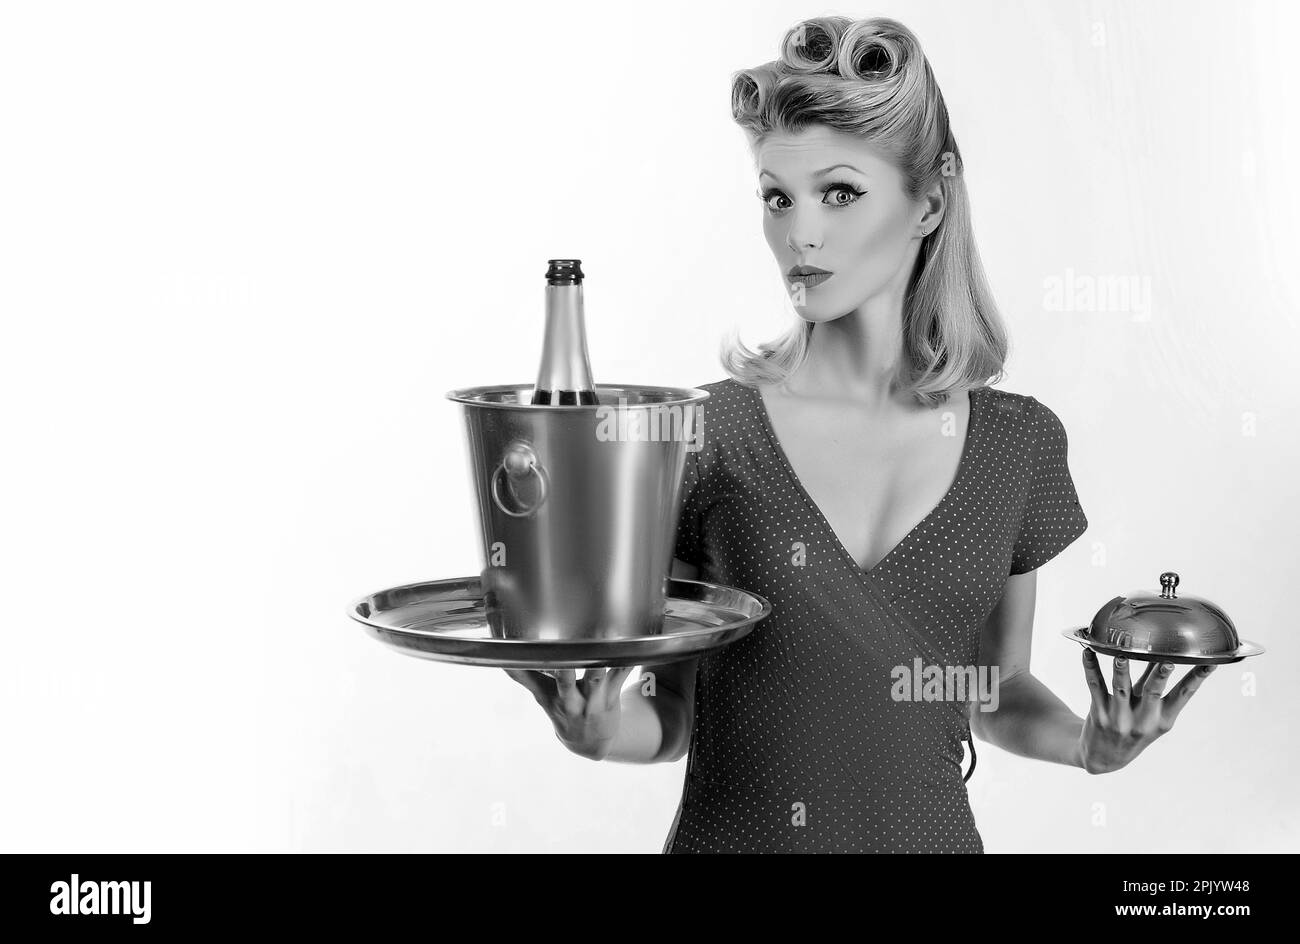 Pin up waiter with champagne and service tray. Restaurant serving presentation. Stock Photo